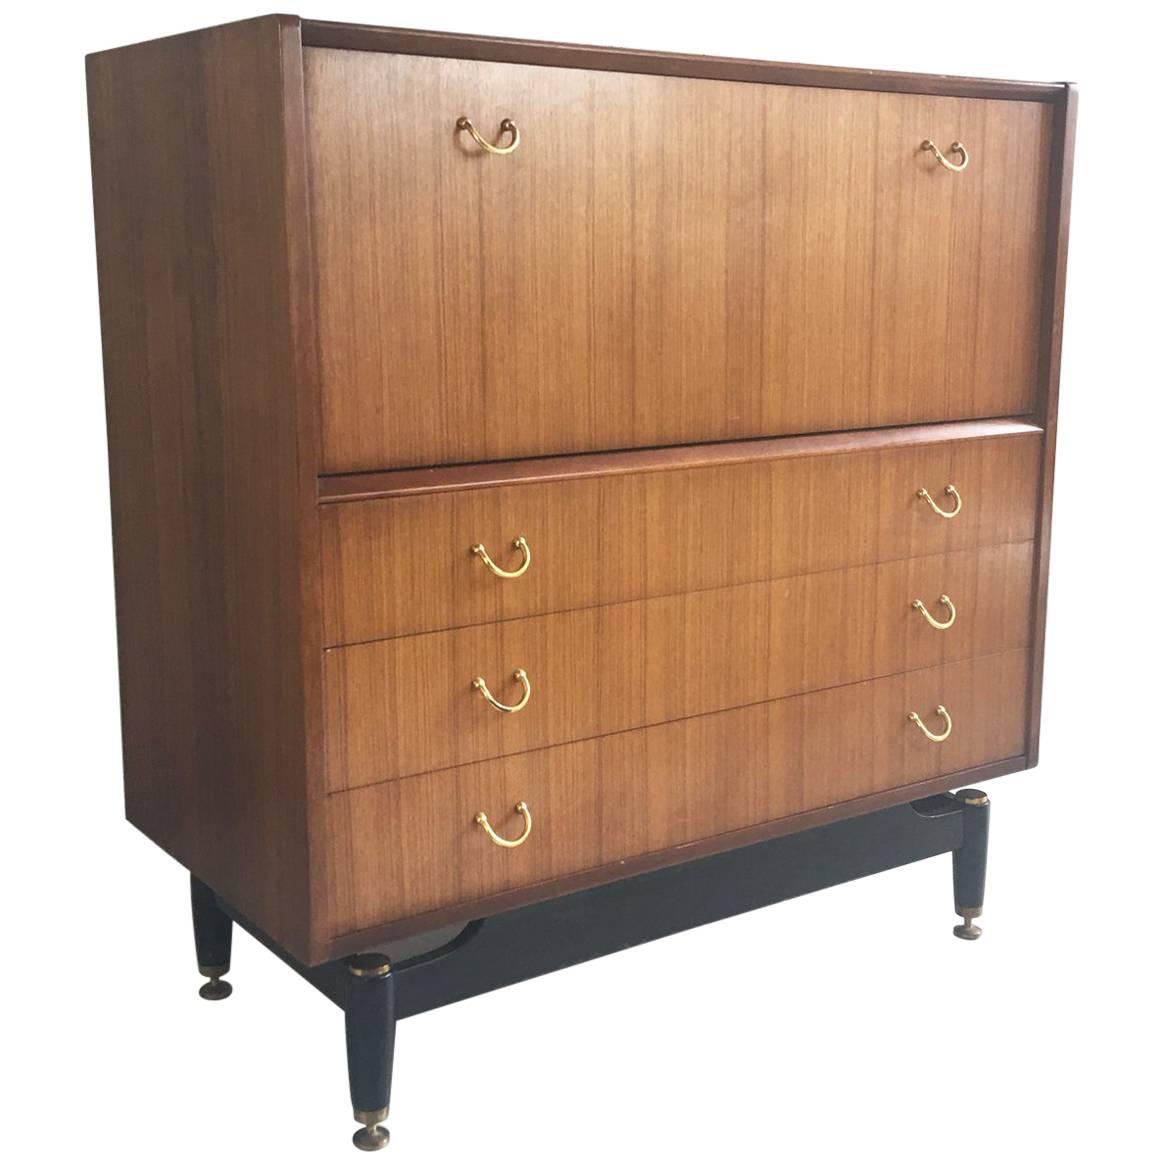 1960s ’Tola’ Drinks Cabinet / Sideboard by E Gomme for G Plan For Sale